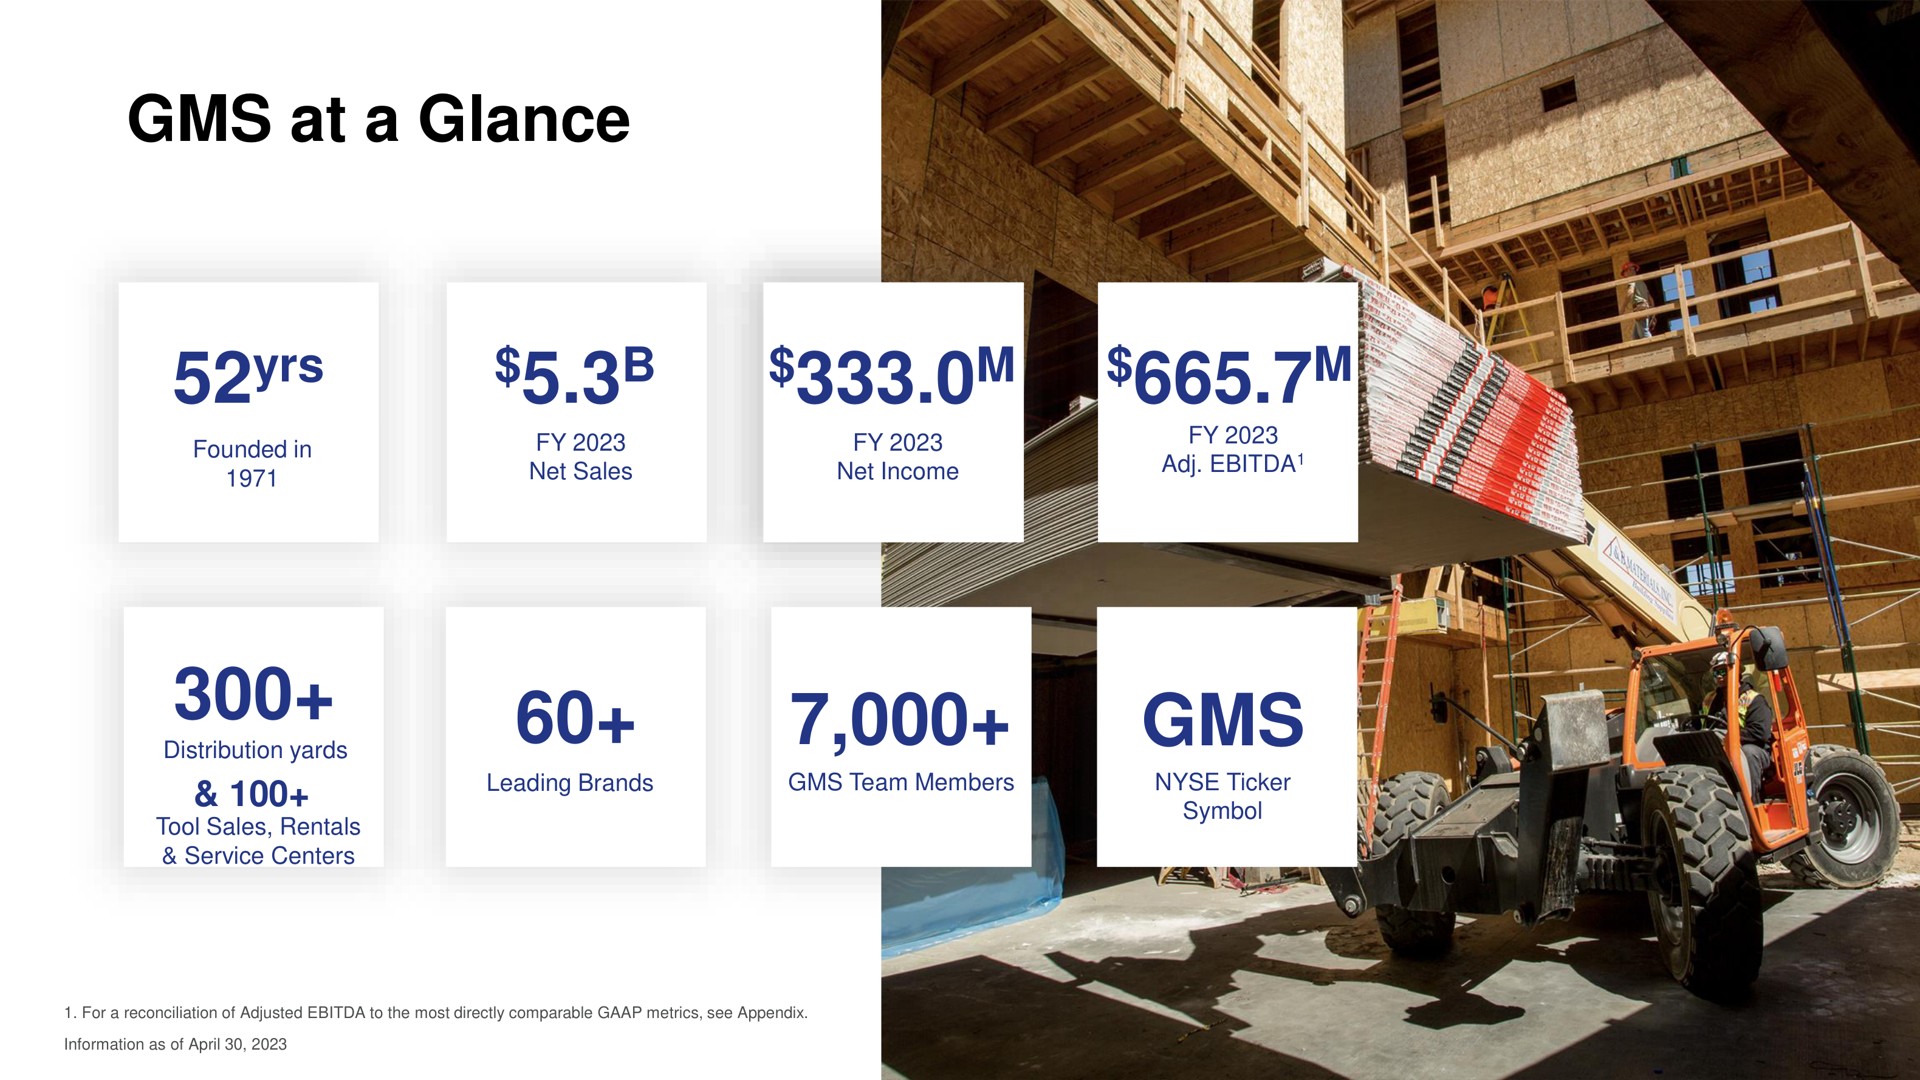 at a glance yrs | GMS